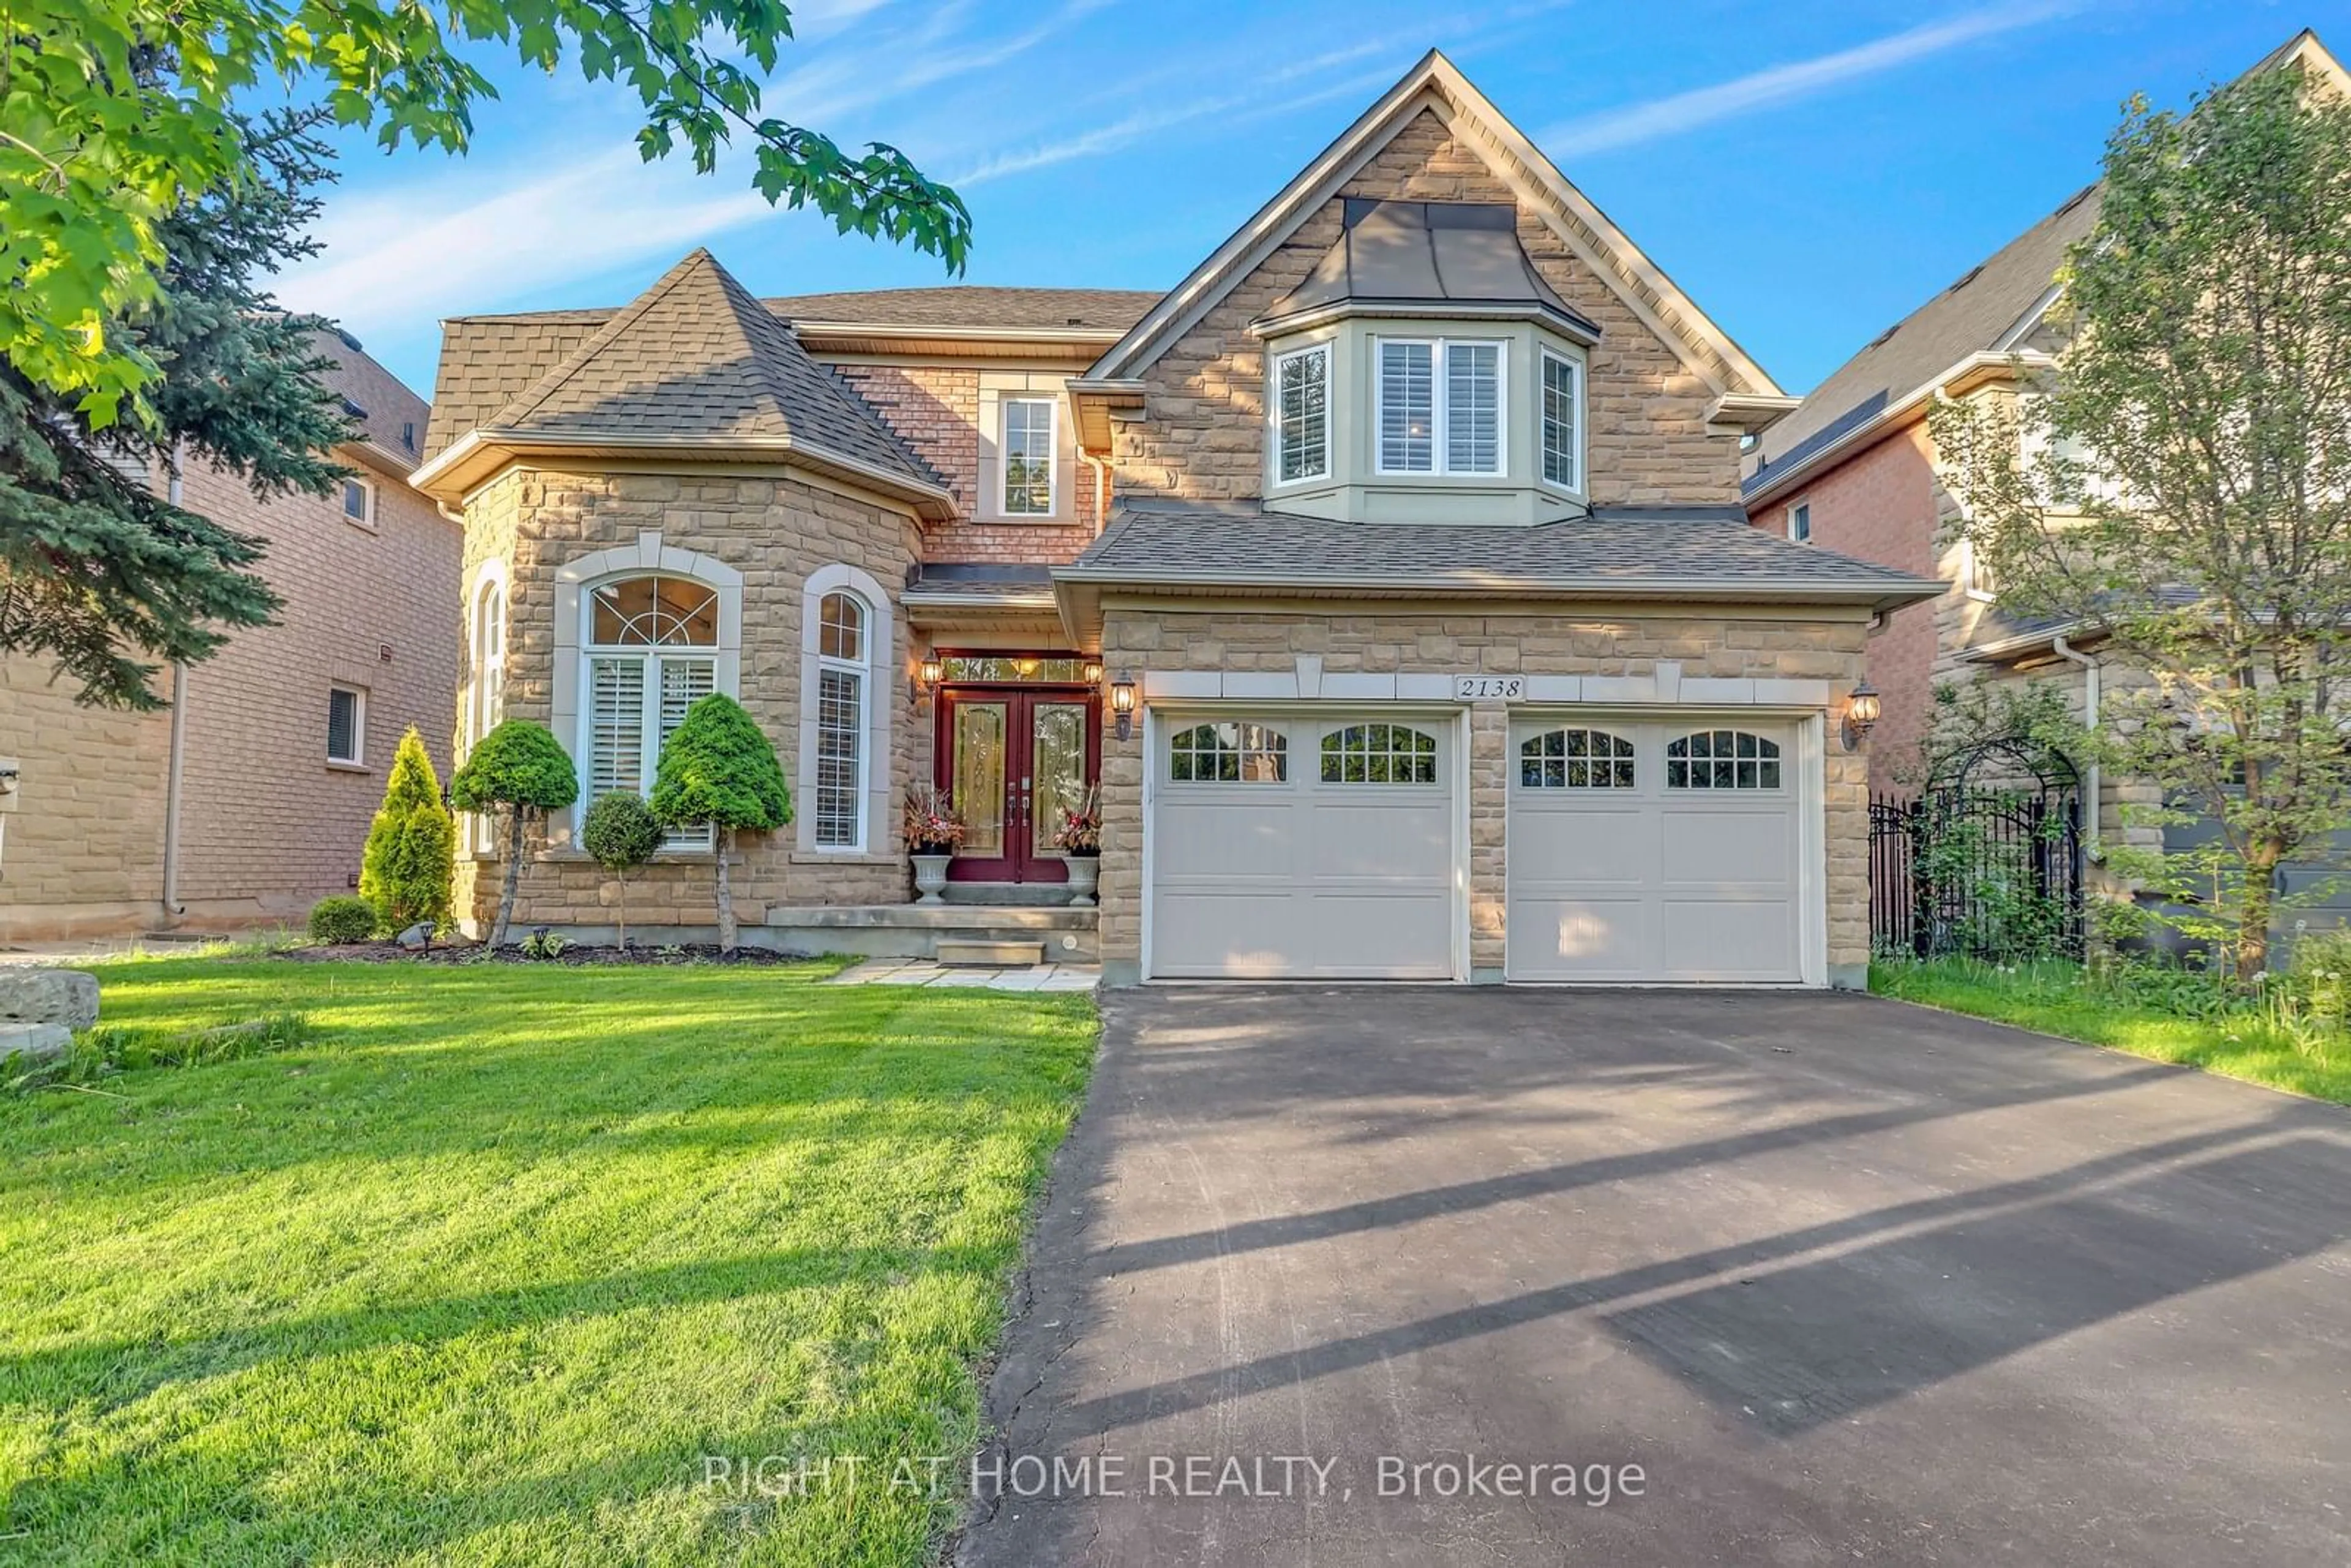 Home with brick exterior material for 2138 Alderbrook Dr, Oakville Ontario L6M 4Z2